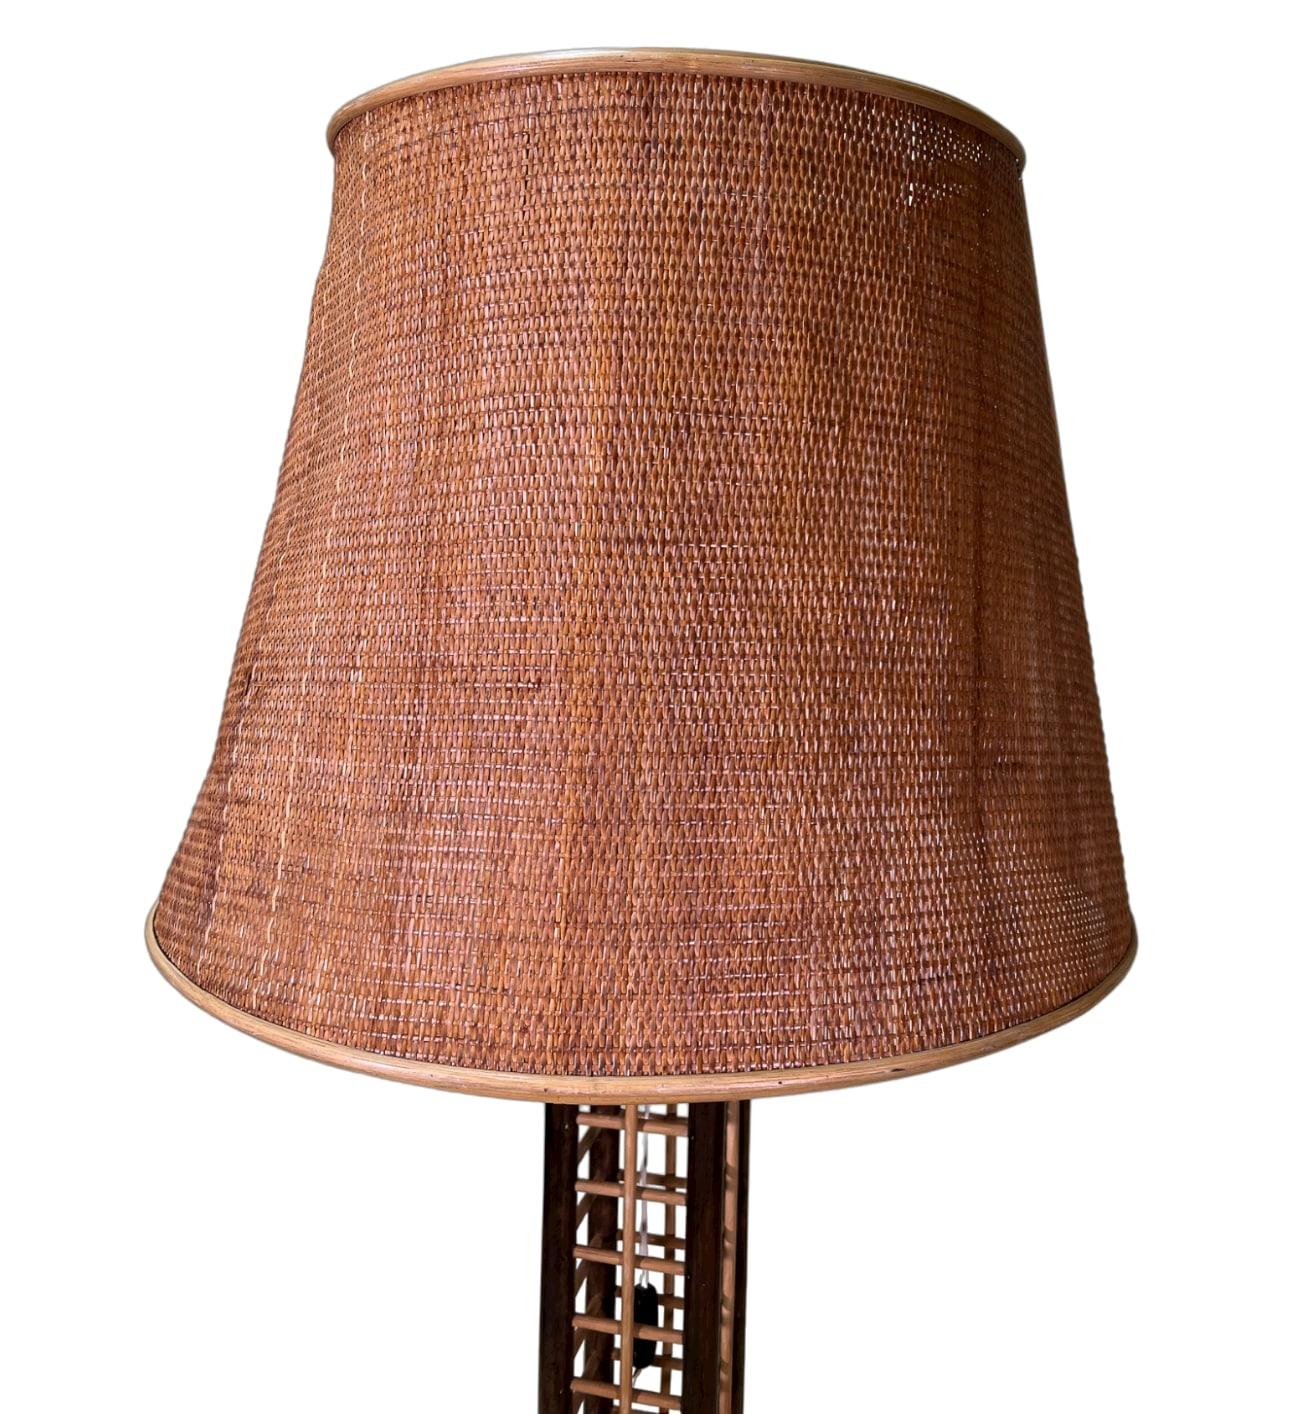 1970's Bamboo Floor Lamp In Good Condition For Sale In New York, NY